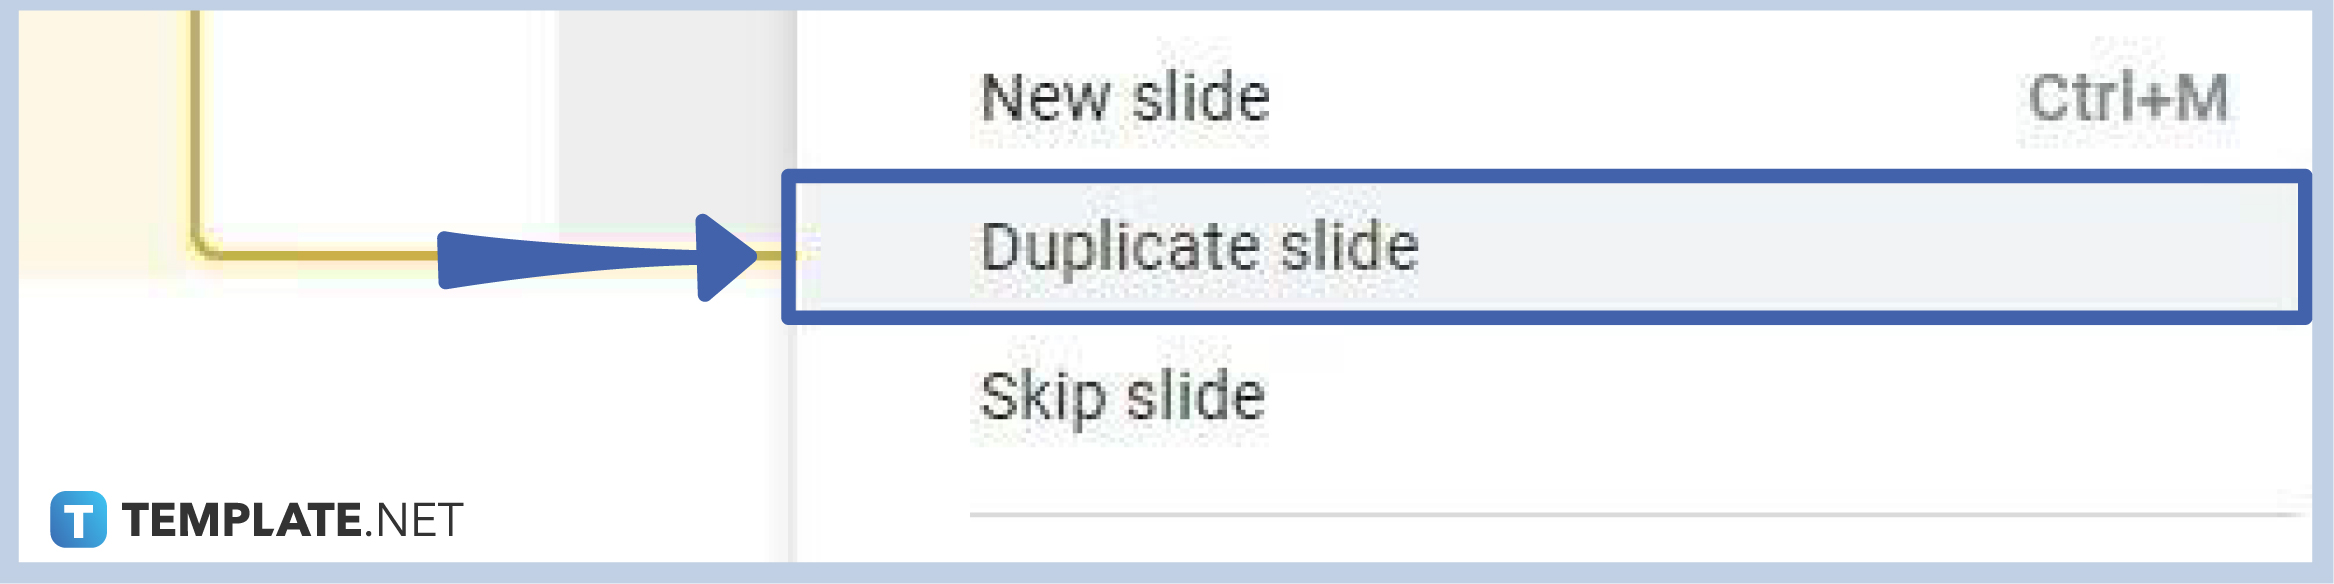 step-3-click-duplicate-slide-multiple-times-to-add-more-slides-01